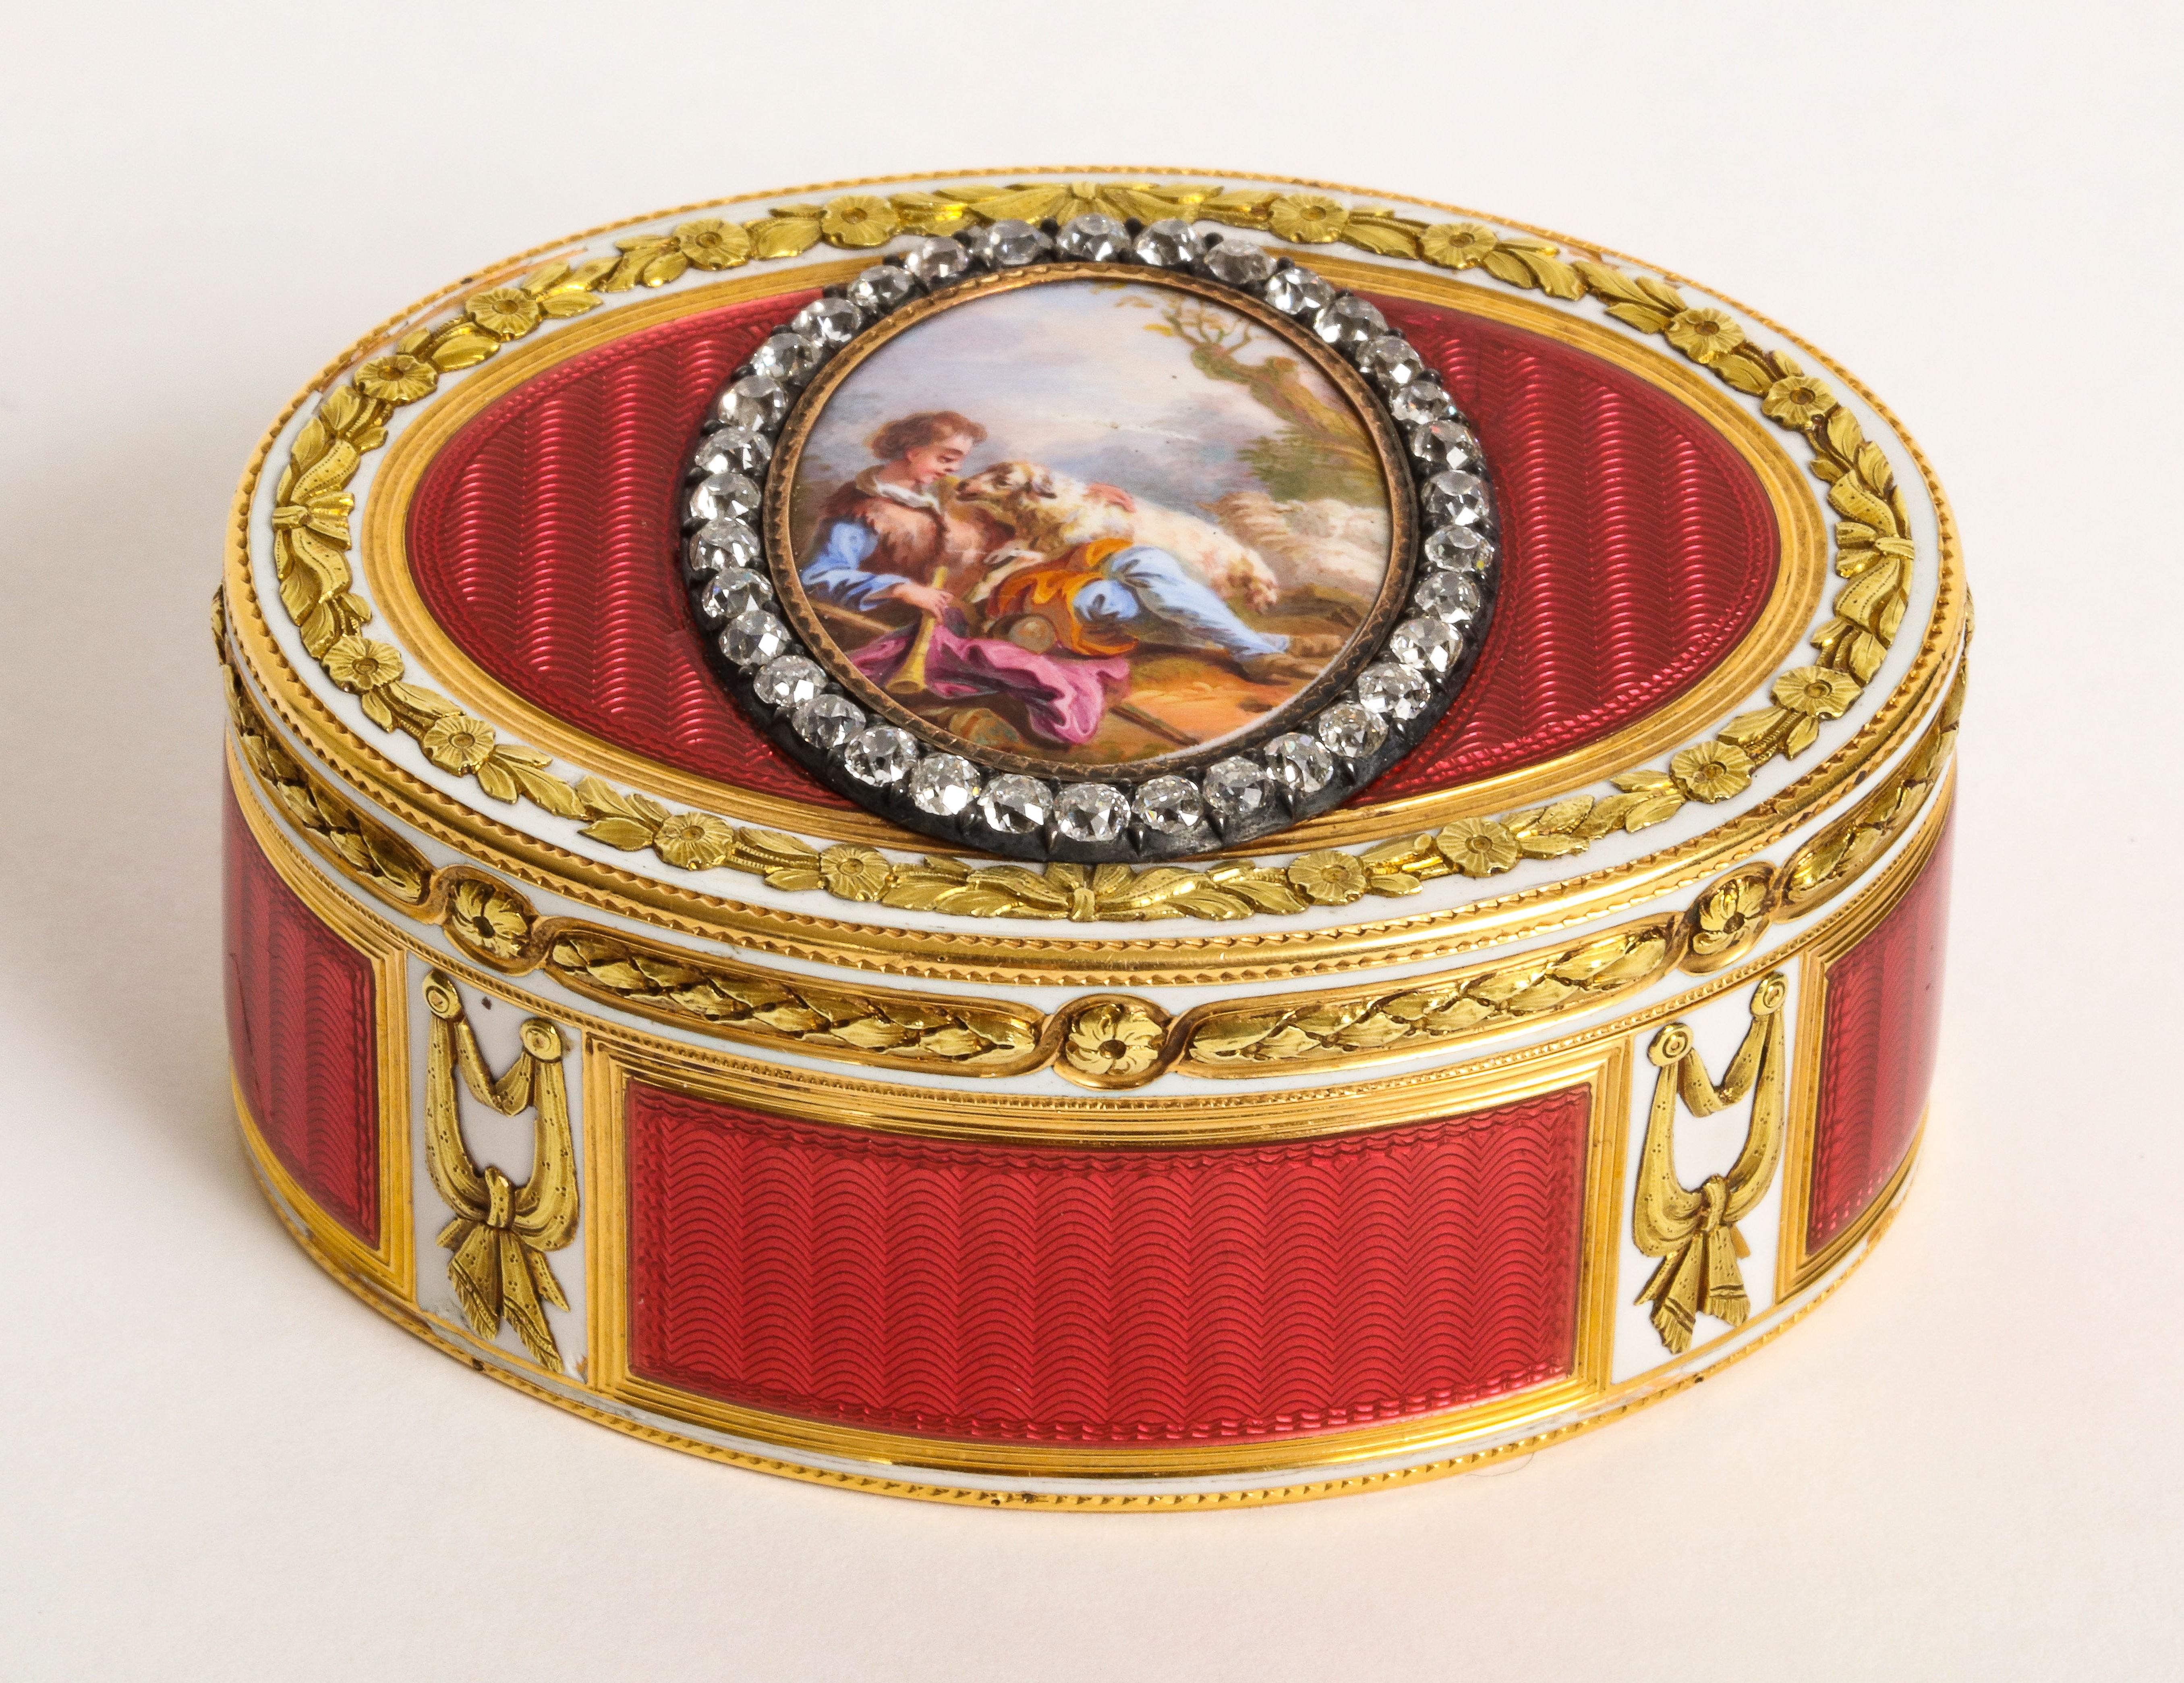 French Jewelled Two-Colour Gold and Enamel Snuff Box, Charles Le Bastier, Paris, 1775